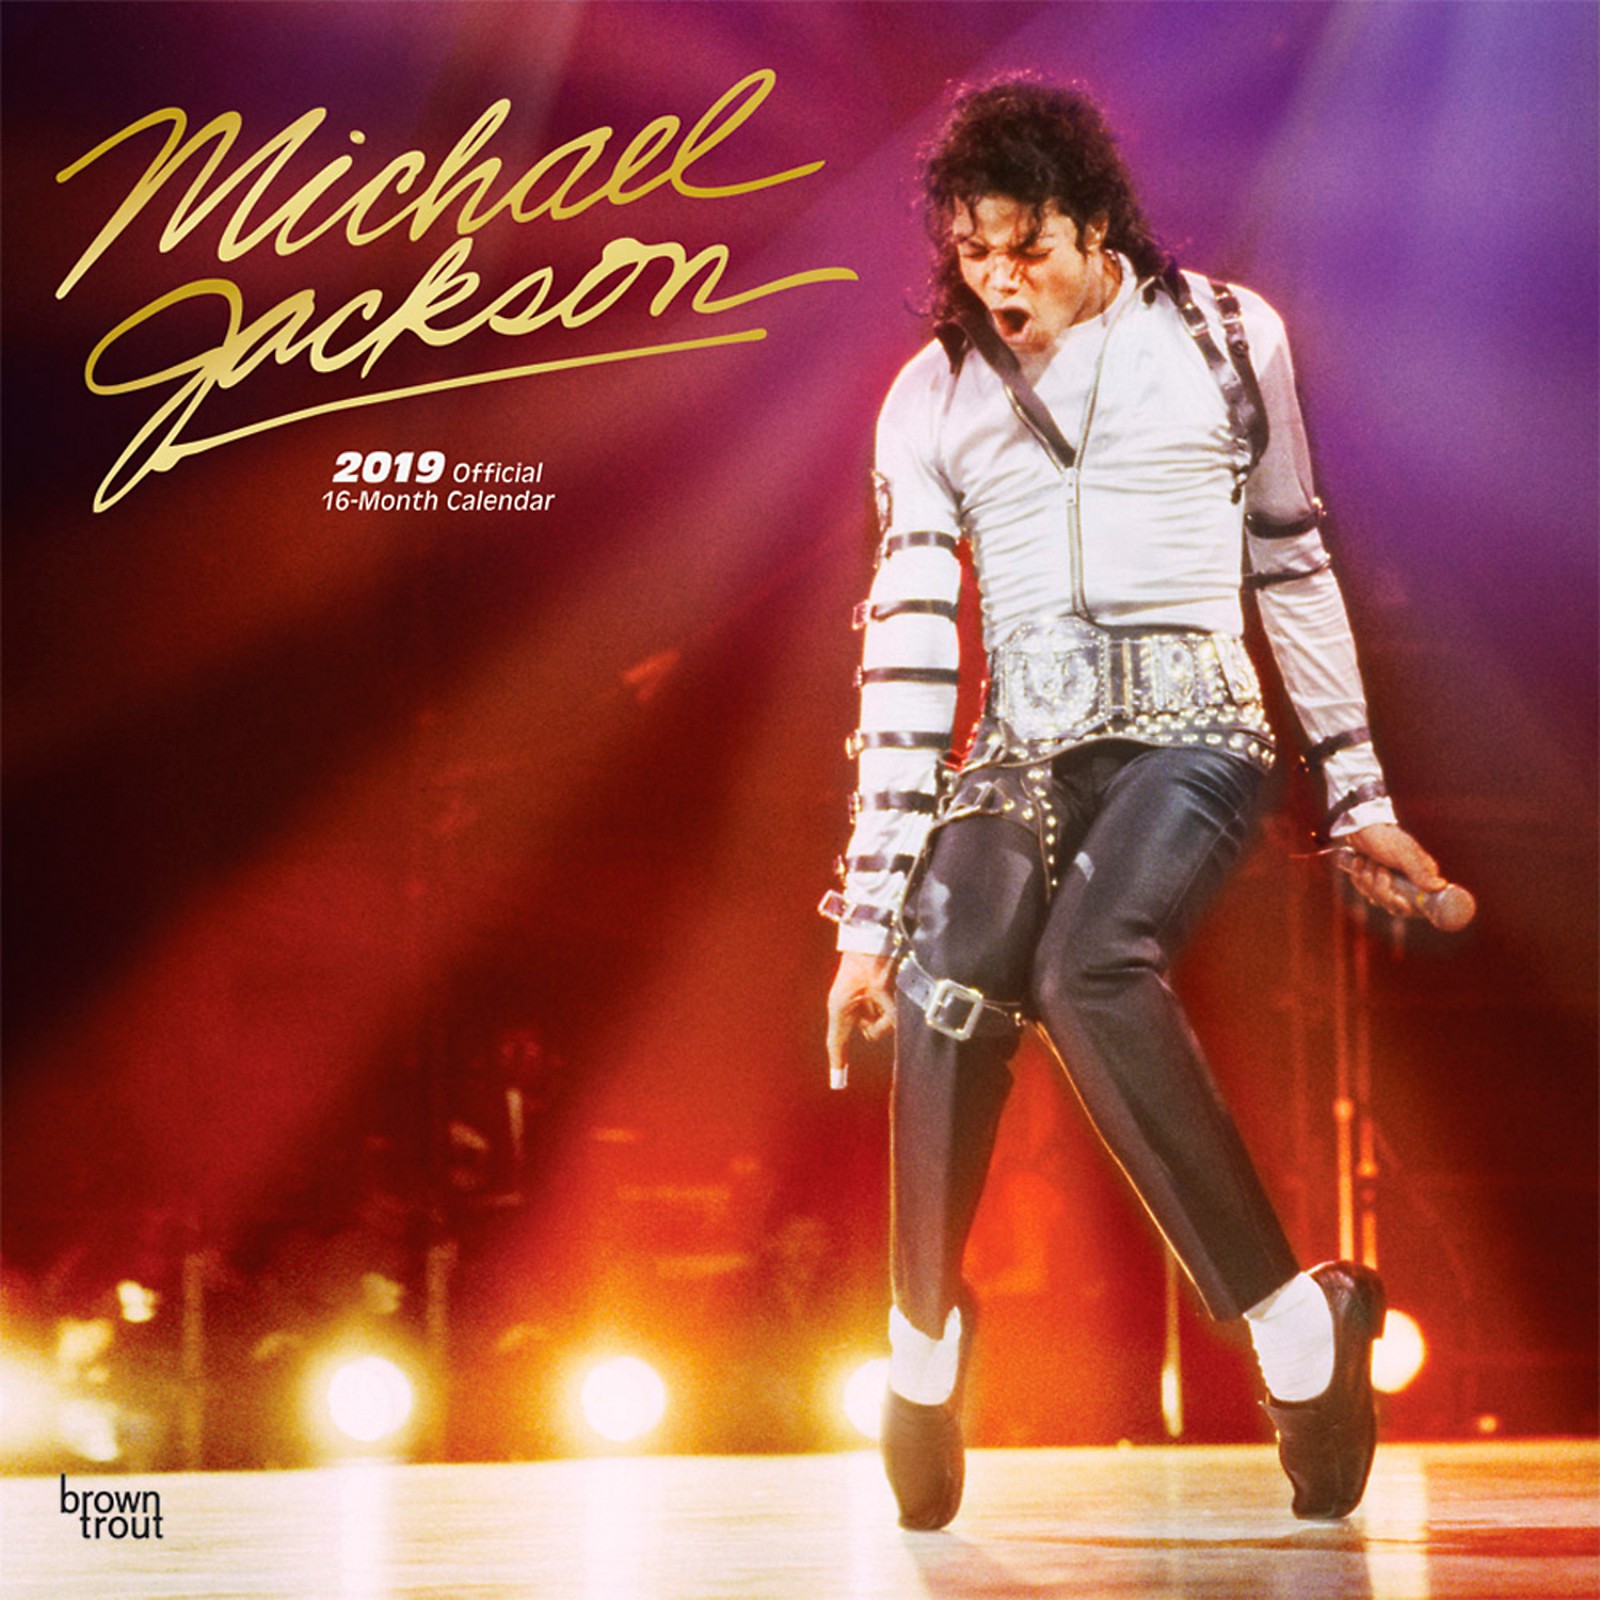 Michael Jackson 2020 12 x 12 Inch Monthly Square Wall Calendar with Foil  Stamped Cover, Pop Music Singer Songwriter Artist Celebrity: BrownTrout  Publishers Inc., BrownTrout Publishers Editing Team, BrownTrout Publishers  Design Team